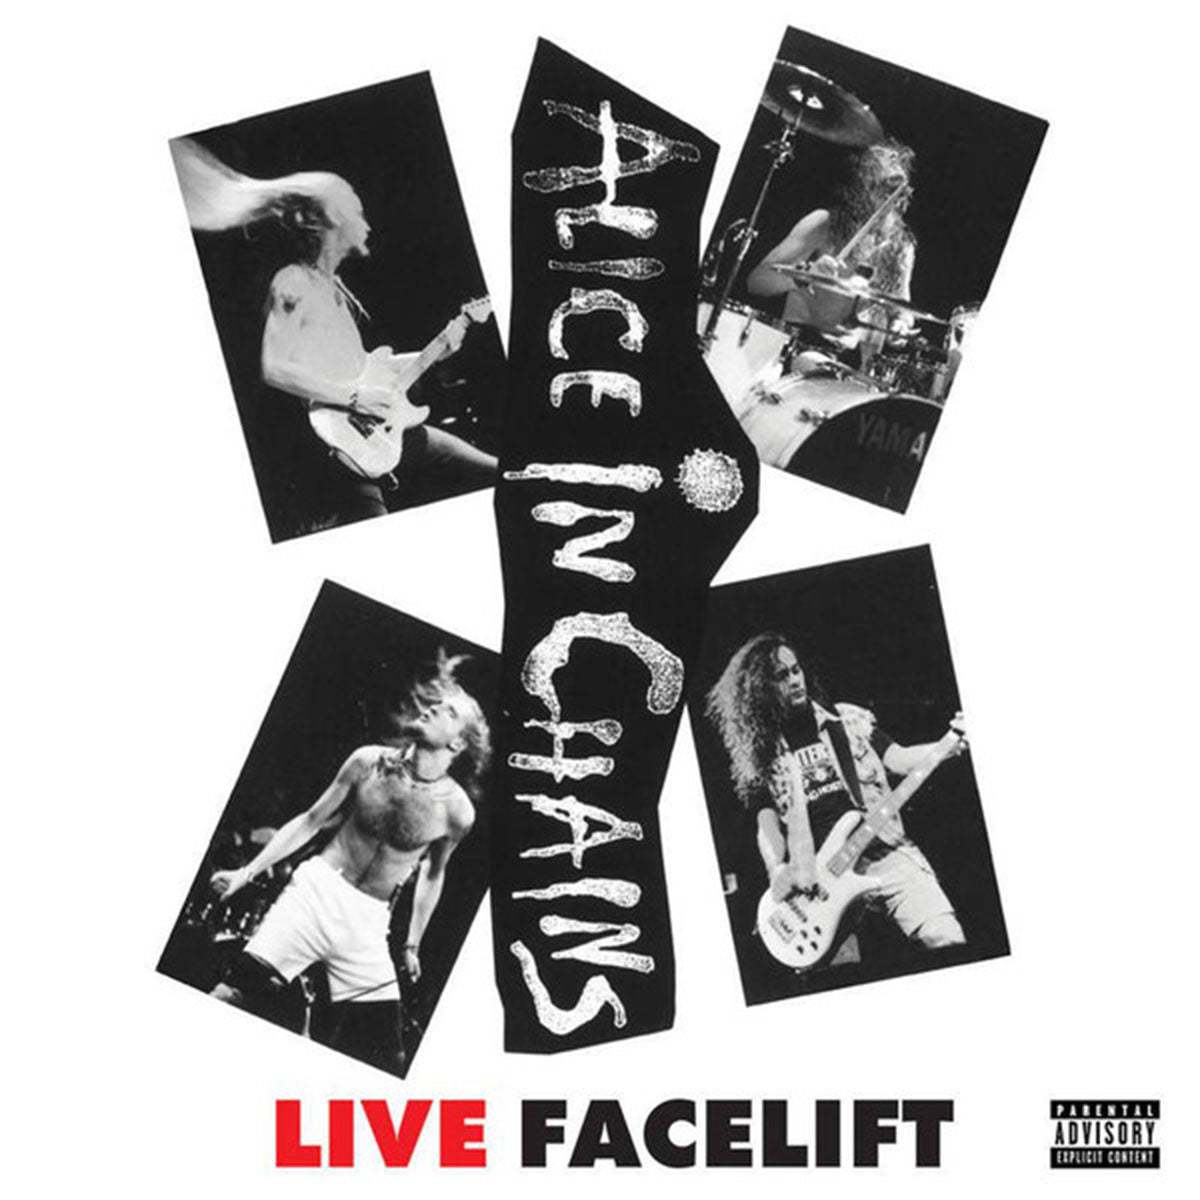 Alice In Chains – Live Facelift - Numbered, Limited Edition